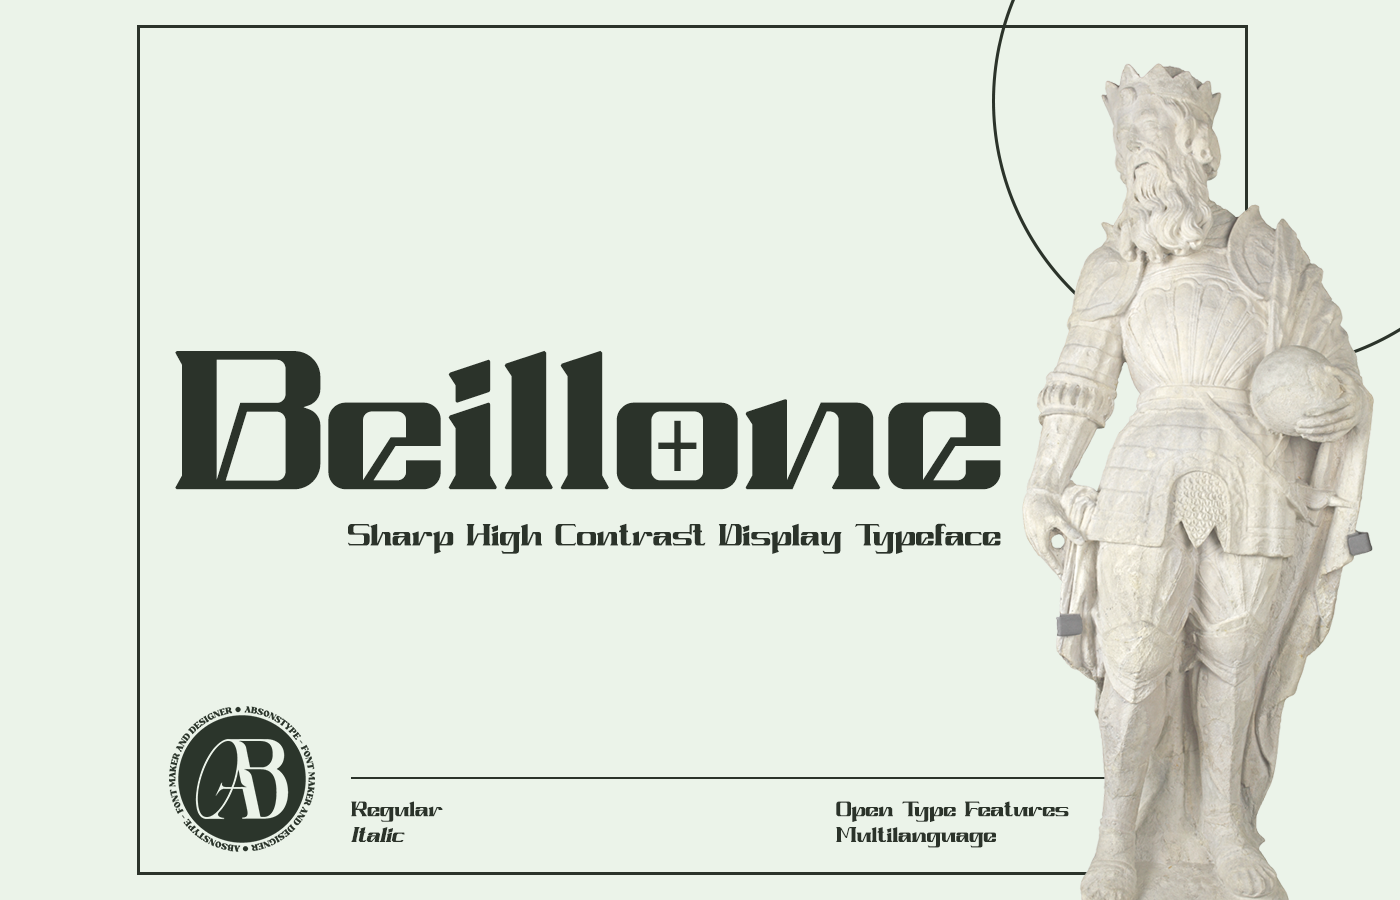 Beillone